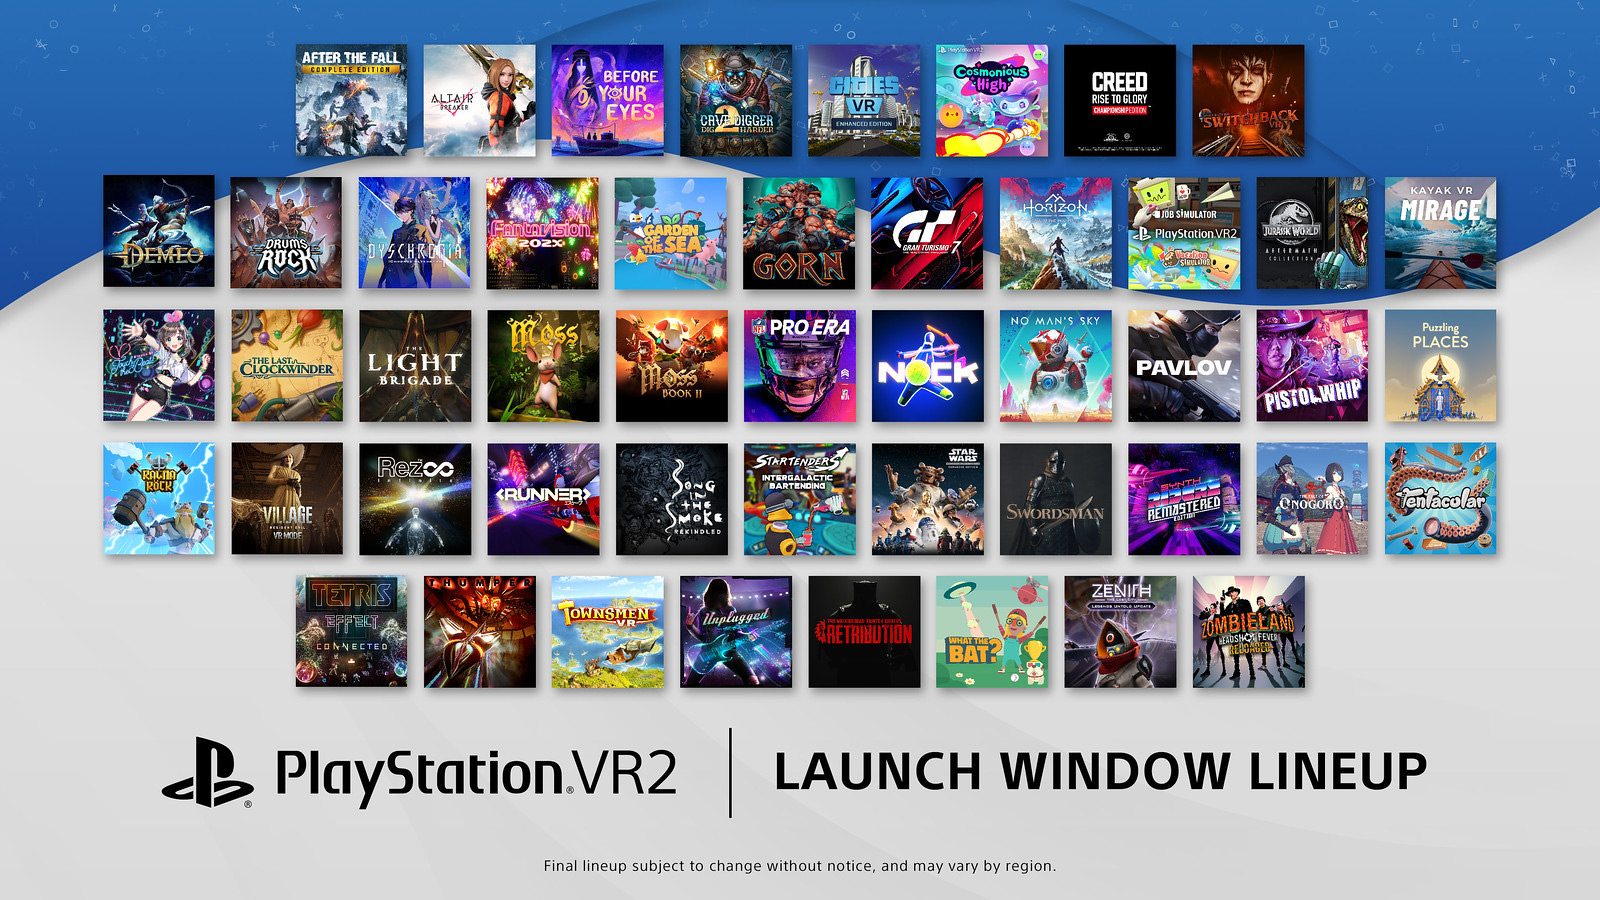 playstation vr2 launch window lineup